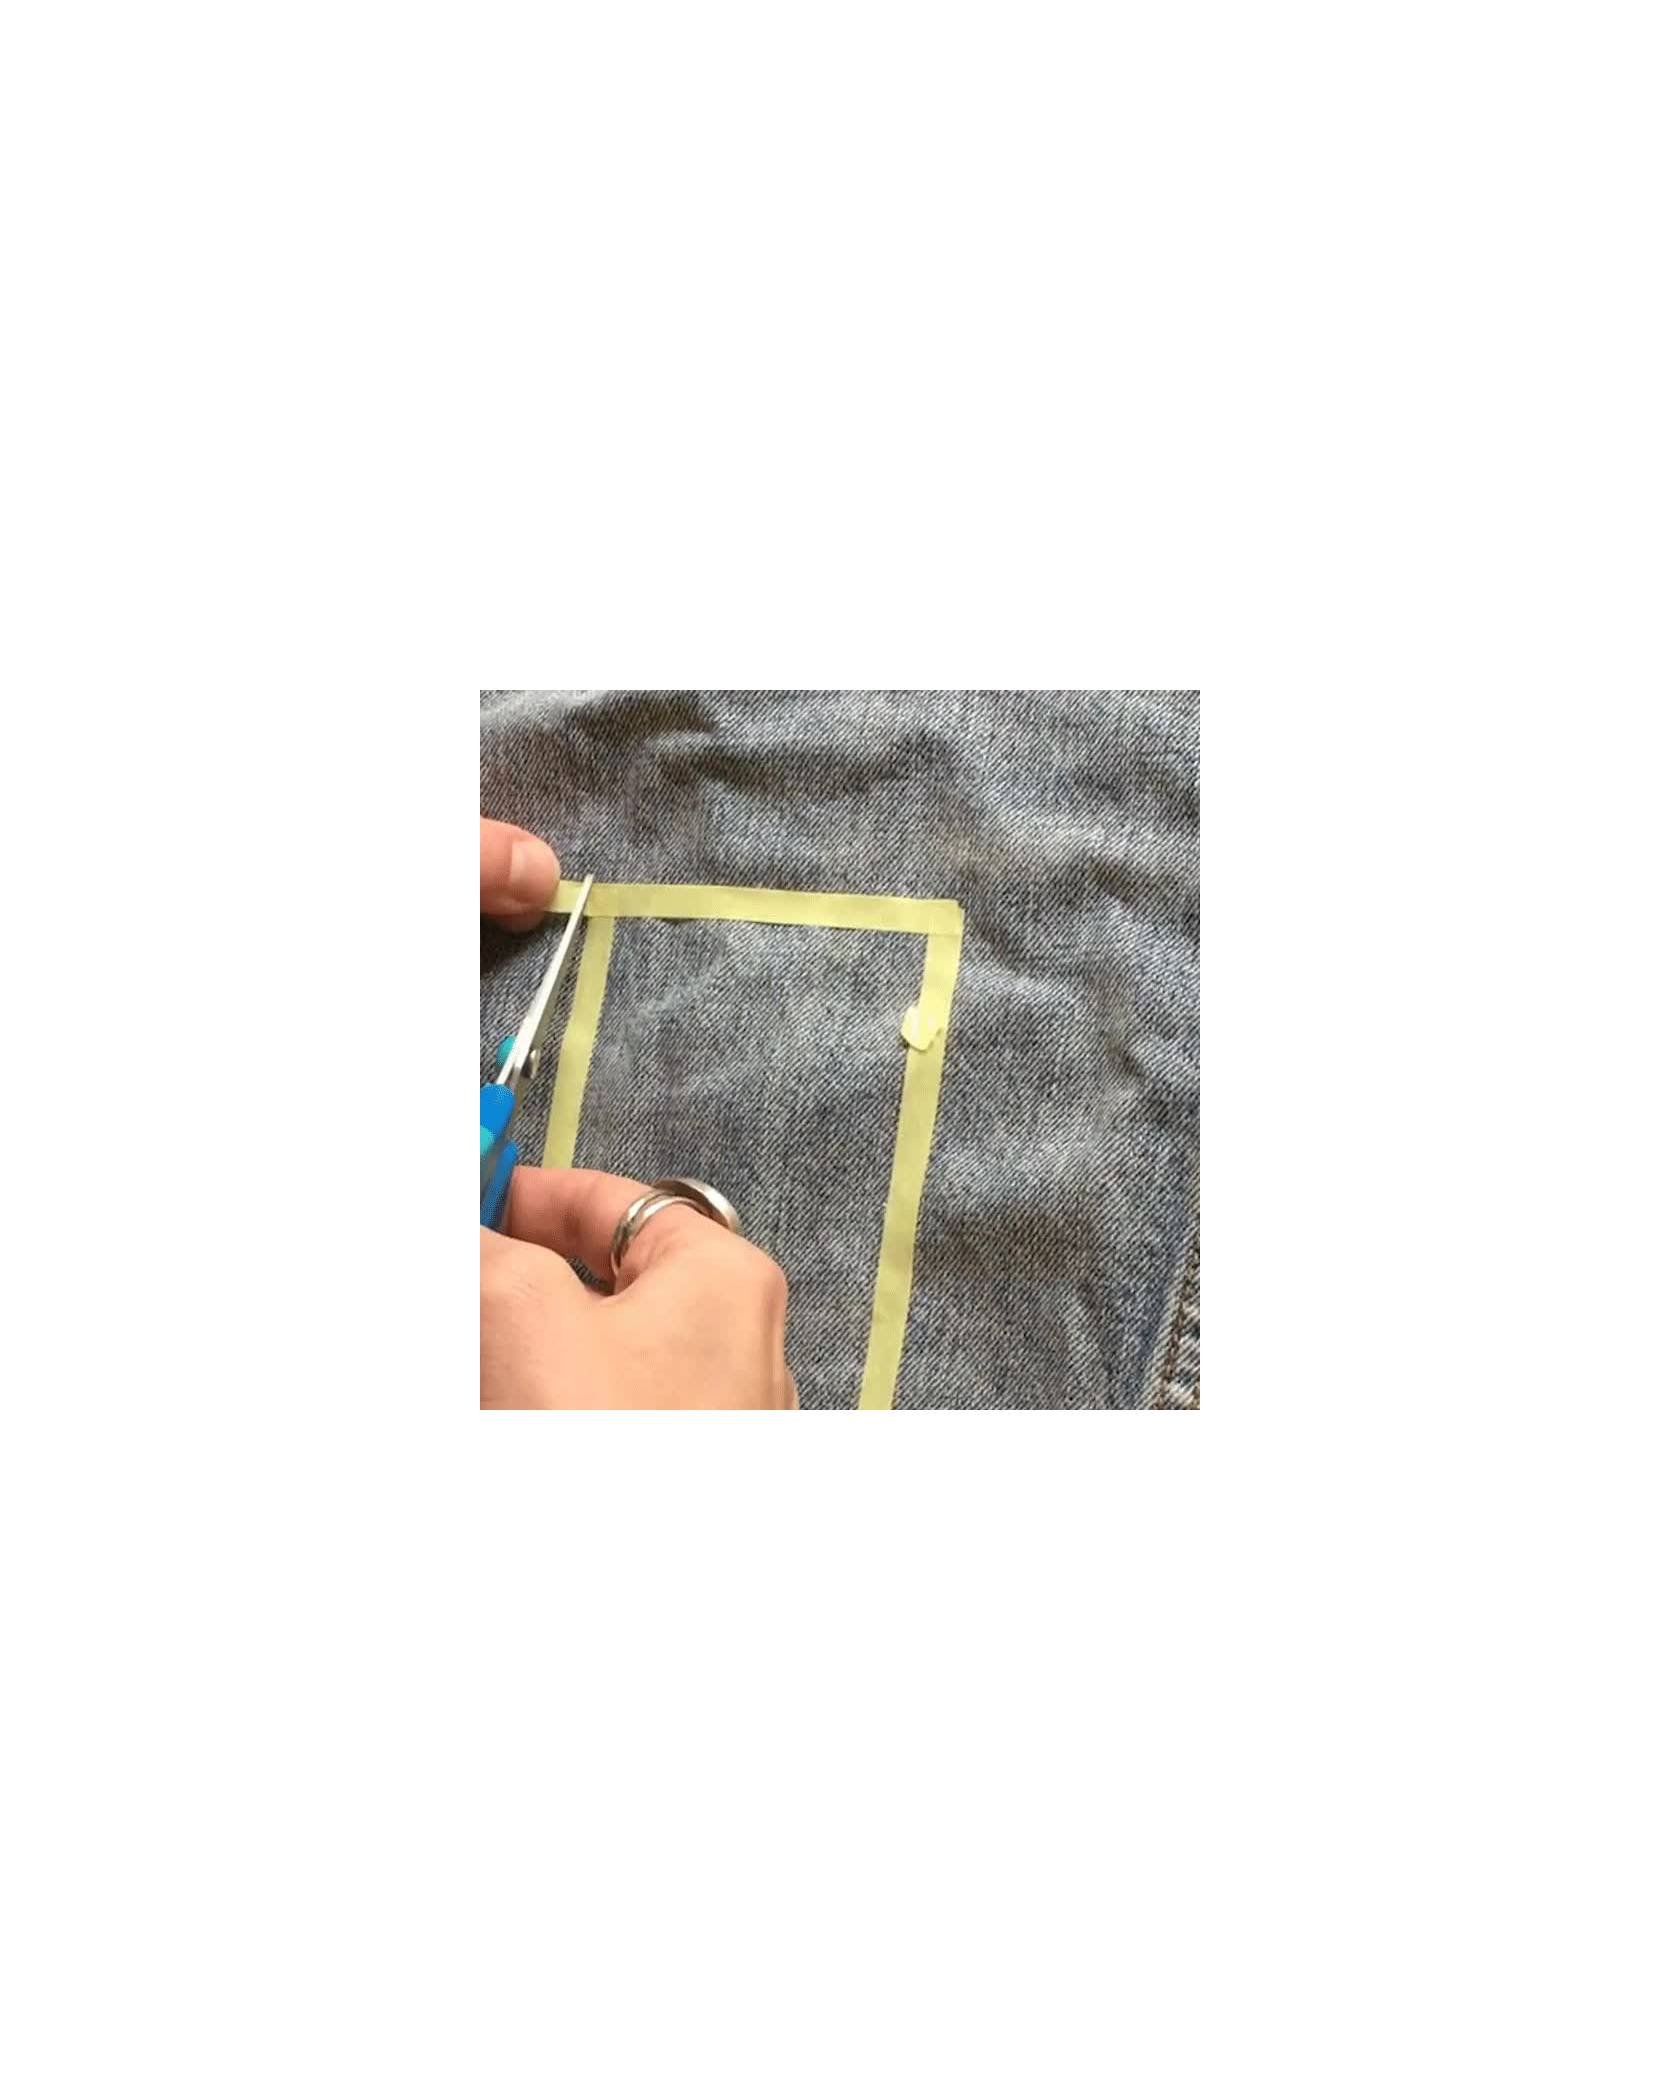 Video of tailor creating a freestyle geometric design with thin yellow tape on a light wash denim trucker jacket.